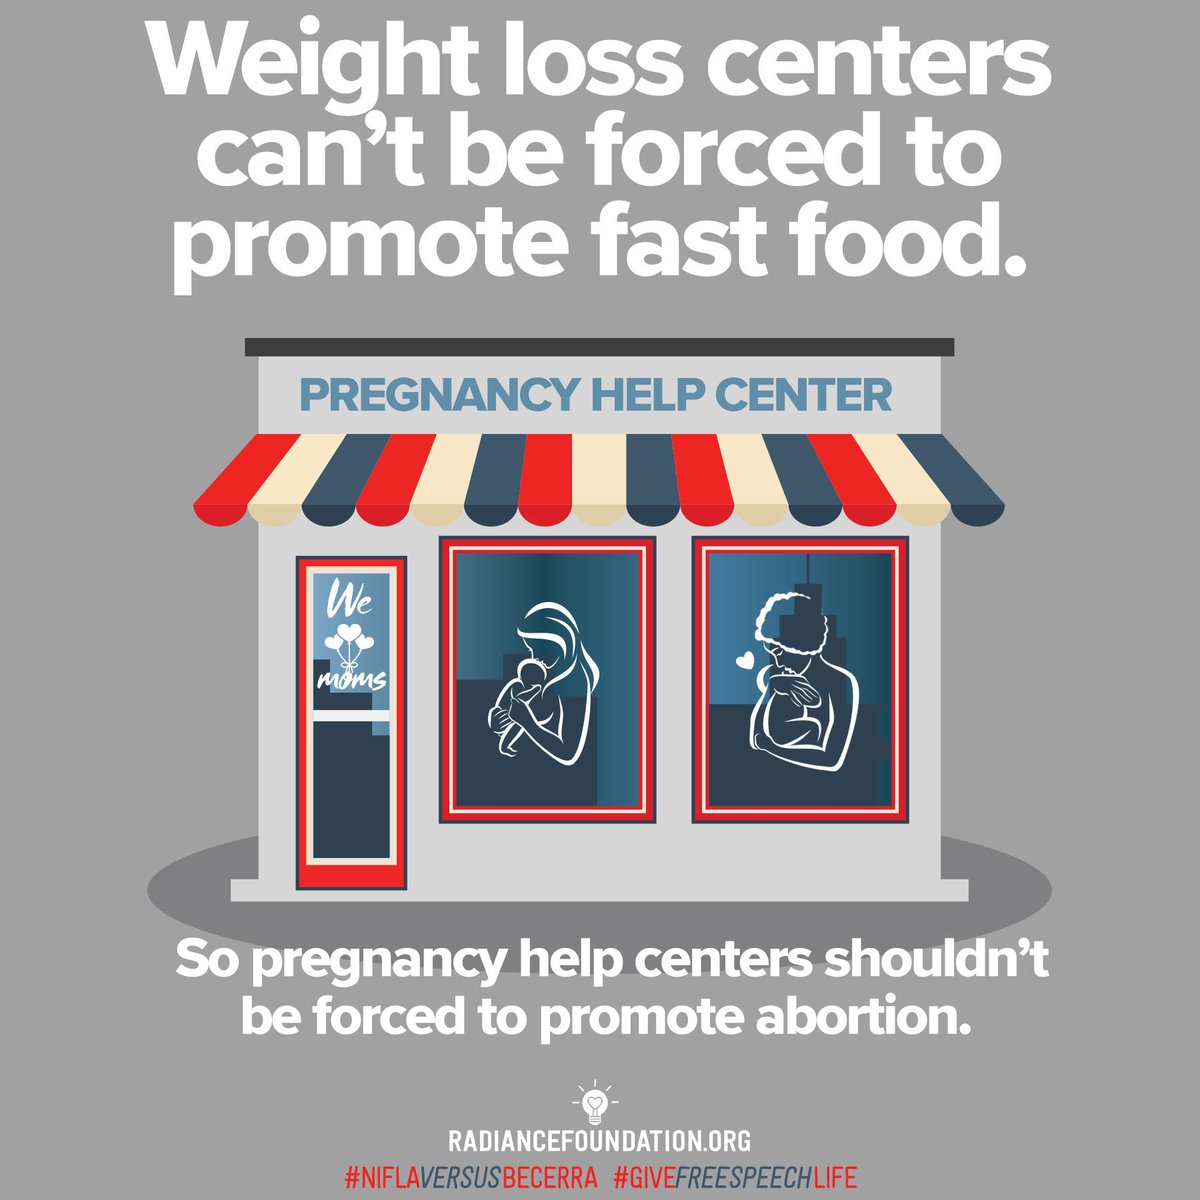 Drug rehab centers can't be forced to promote drinking alcohol. Weight-loss groups can't be forced to promote fast food. So pregnancy help centers shouldn't be forced to promote abortion. It's that simple. #NIFLAvBecerra #GiveFreeSpeechLife #SCOTUS